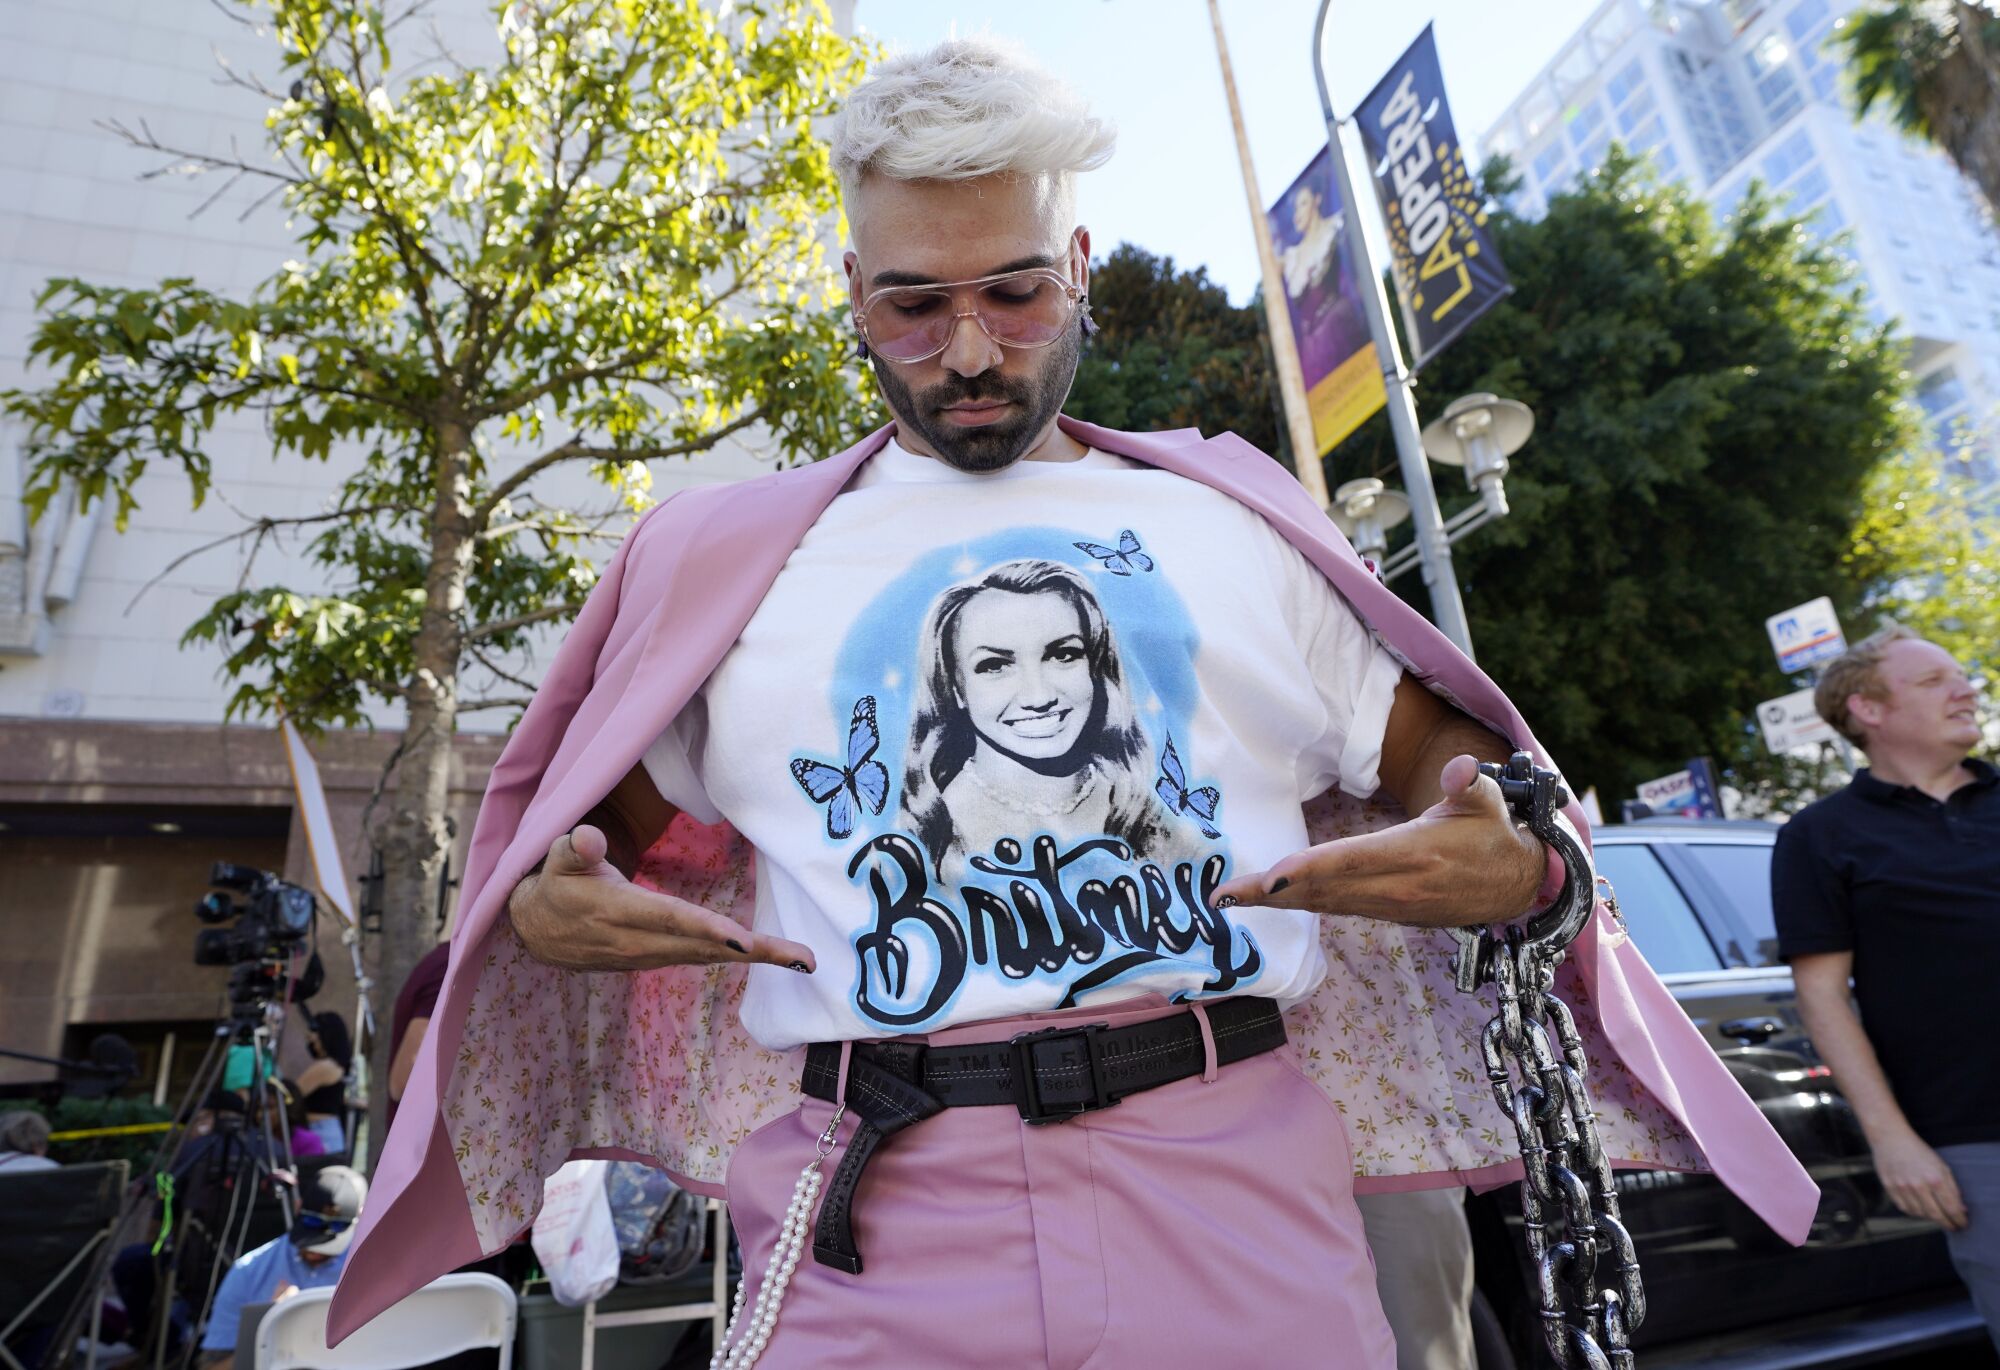 New Jersey performer and Britney Spears supporter "Brennyboombox" shows off his T-shirt 